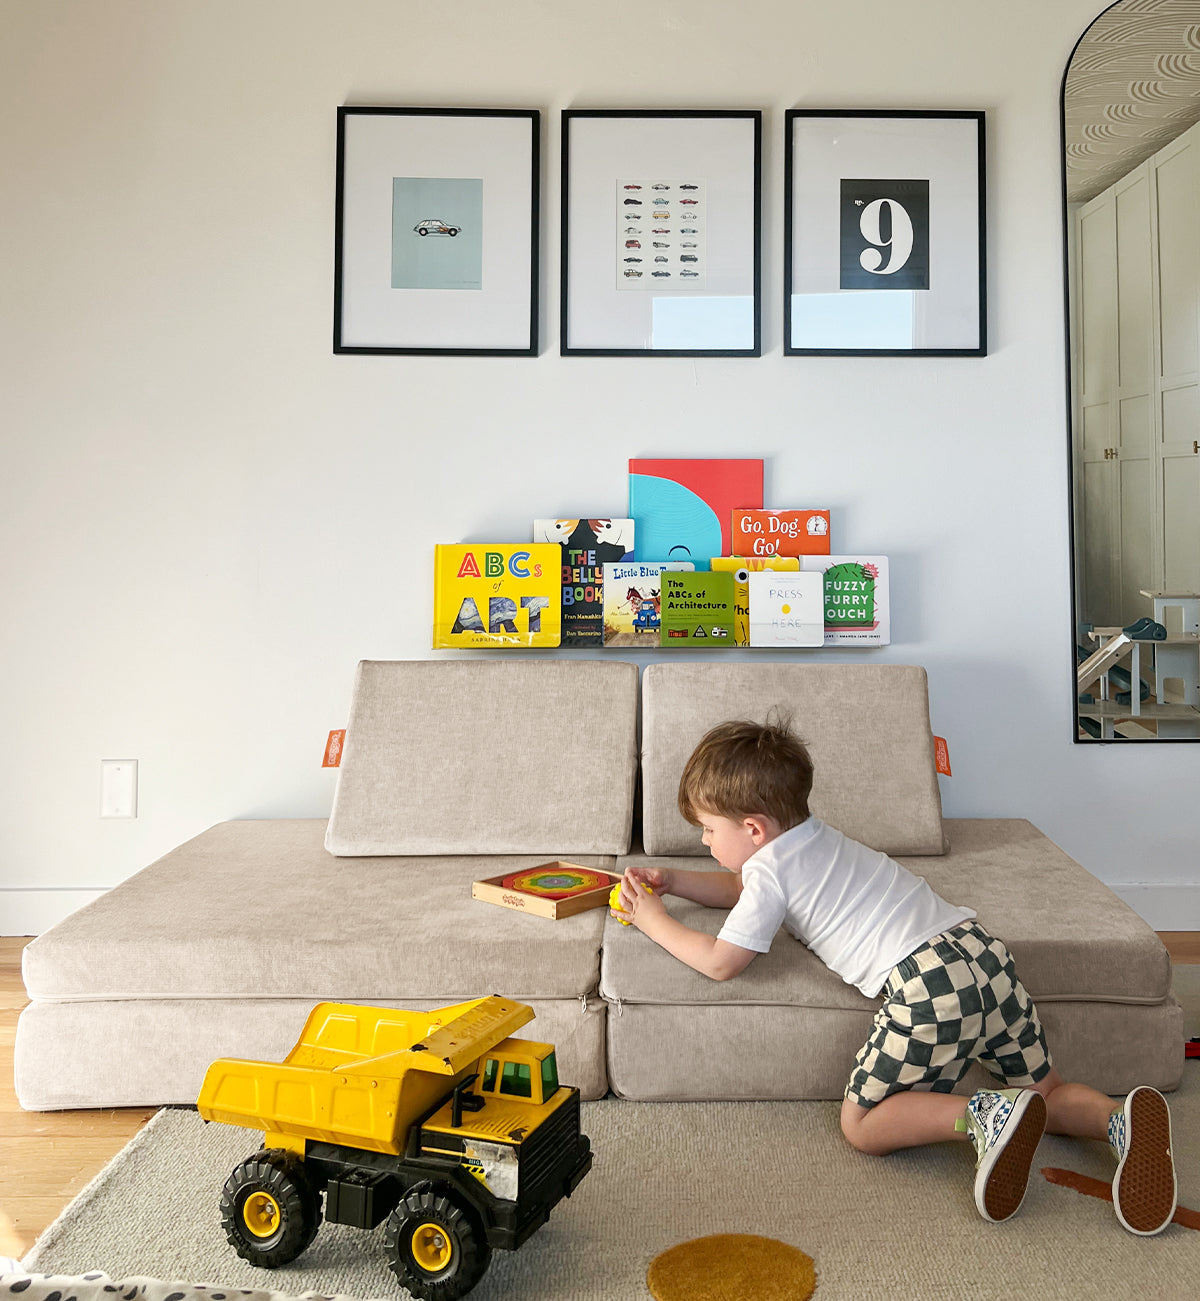 A child plays with a puzzle on a Dunebuggy Nugget surrounded by books and a yellow dump truck toy